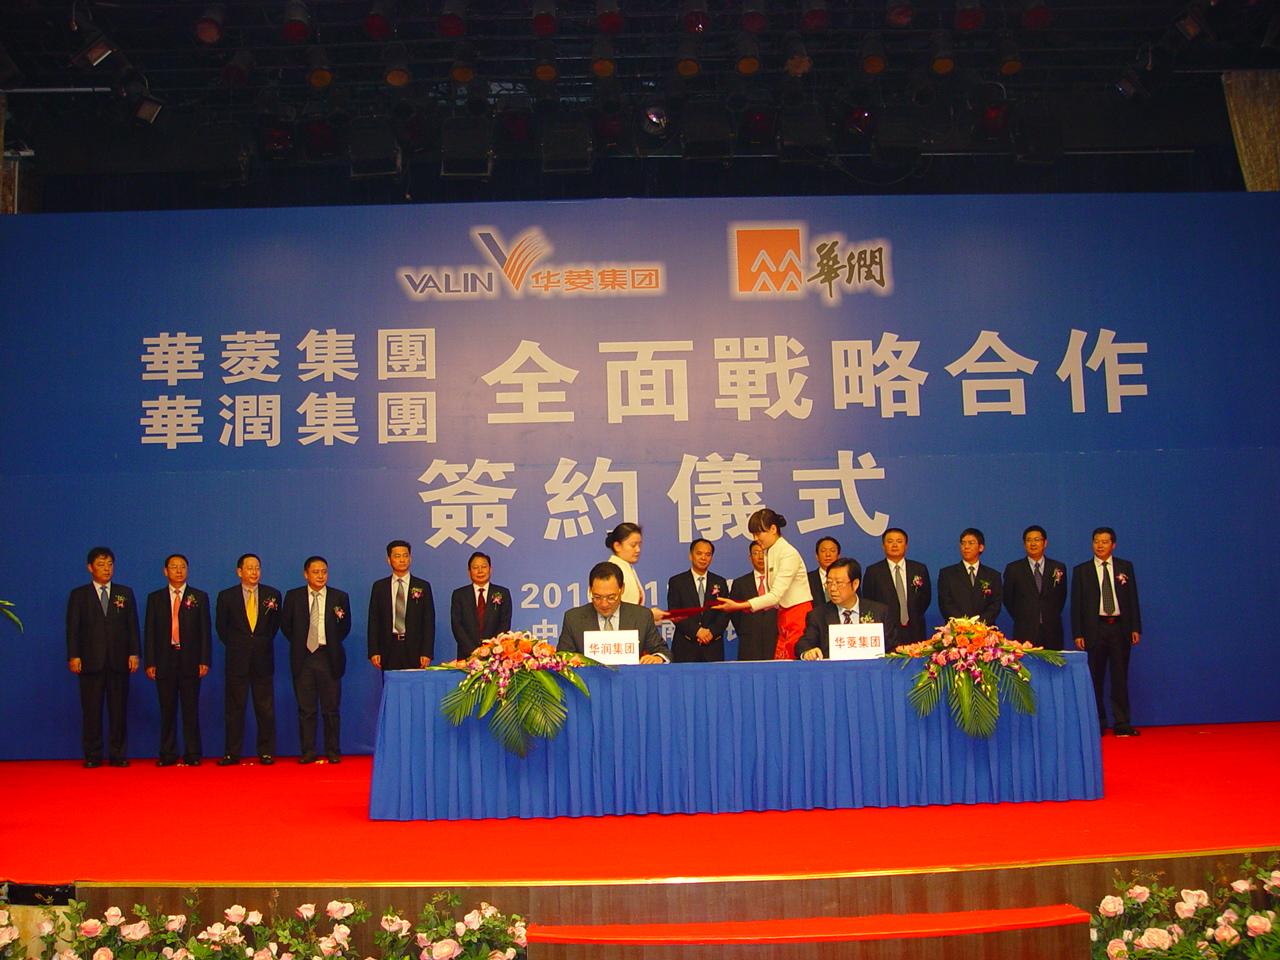 China Resources (Holdings) Co., Ltd signed Strategic Collaboration Framework Agreement with Hunan Valin Steel Group Co., Ltd